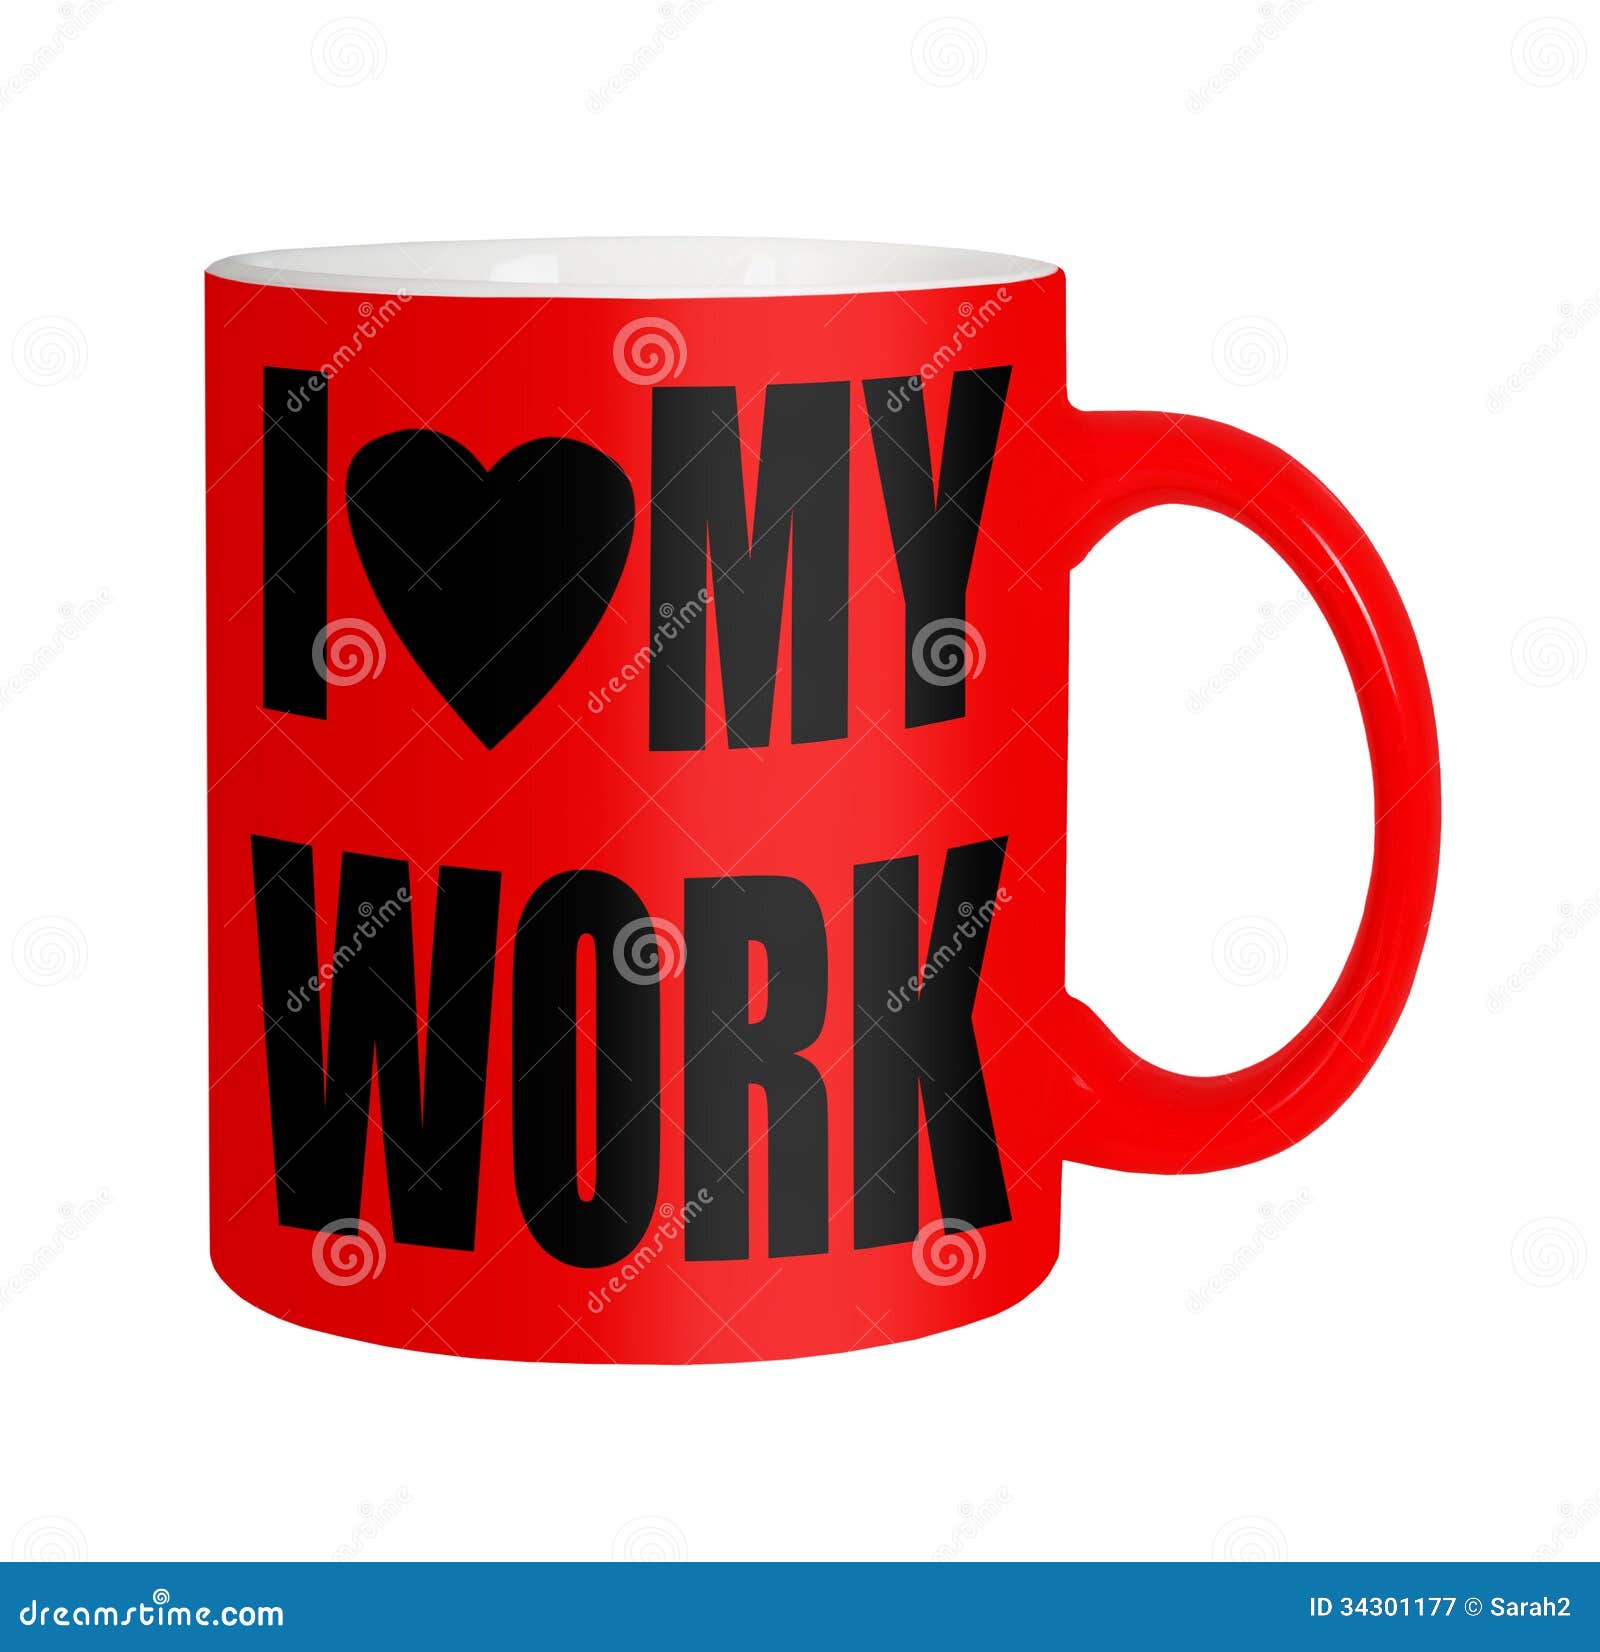 happy workplace clipart - photo #40